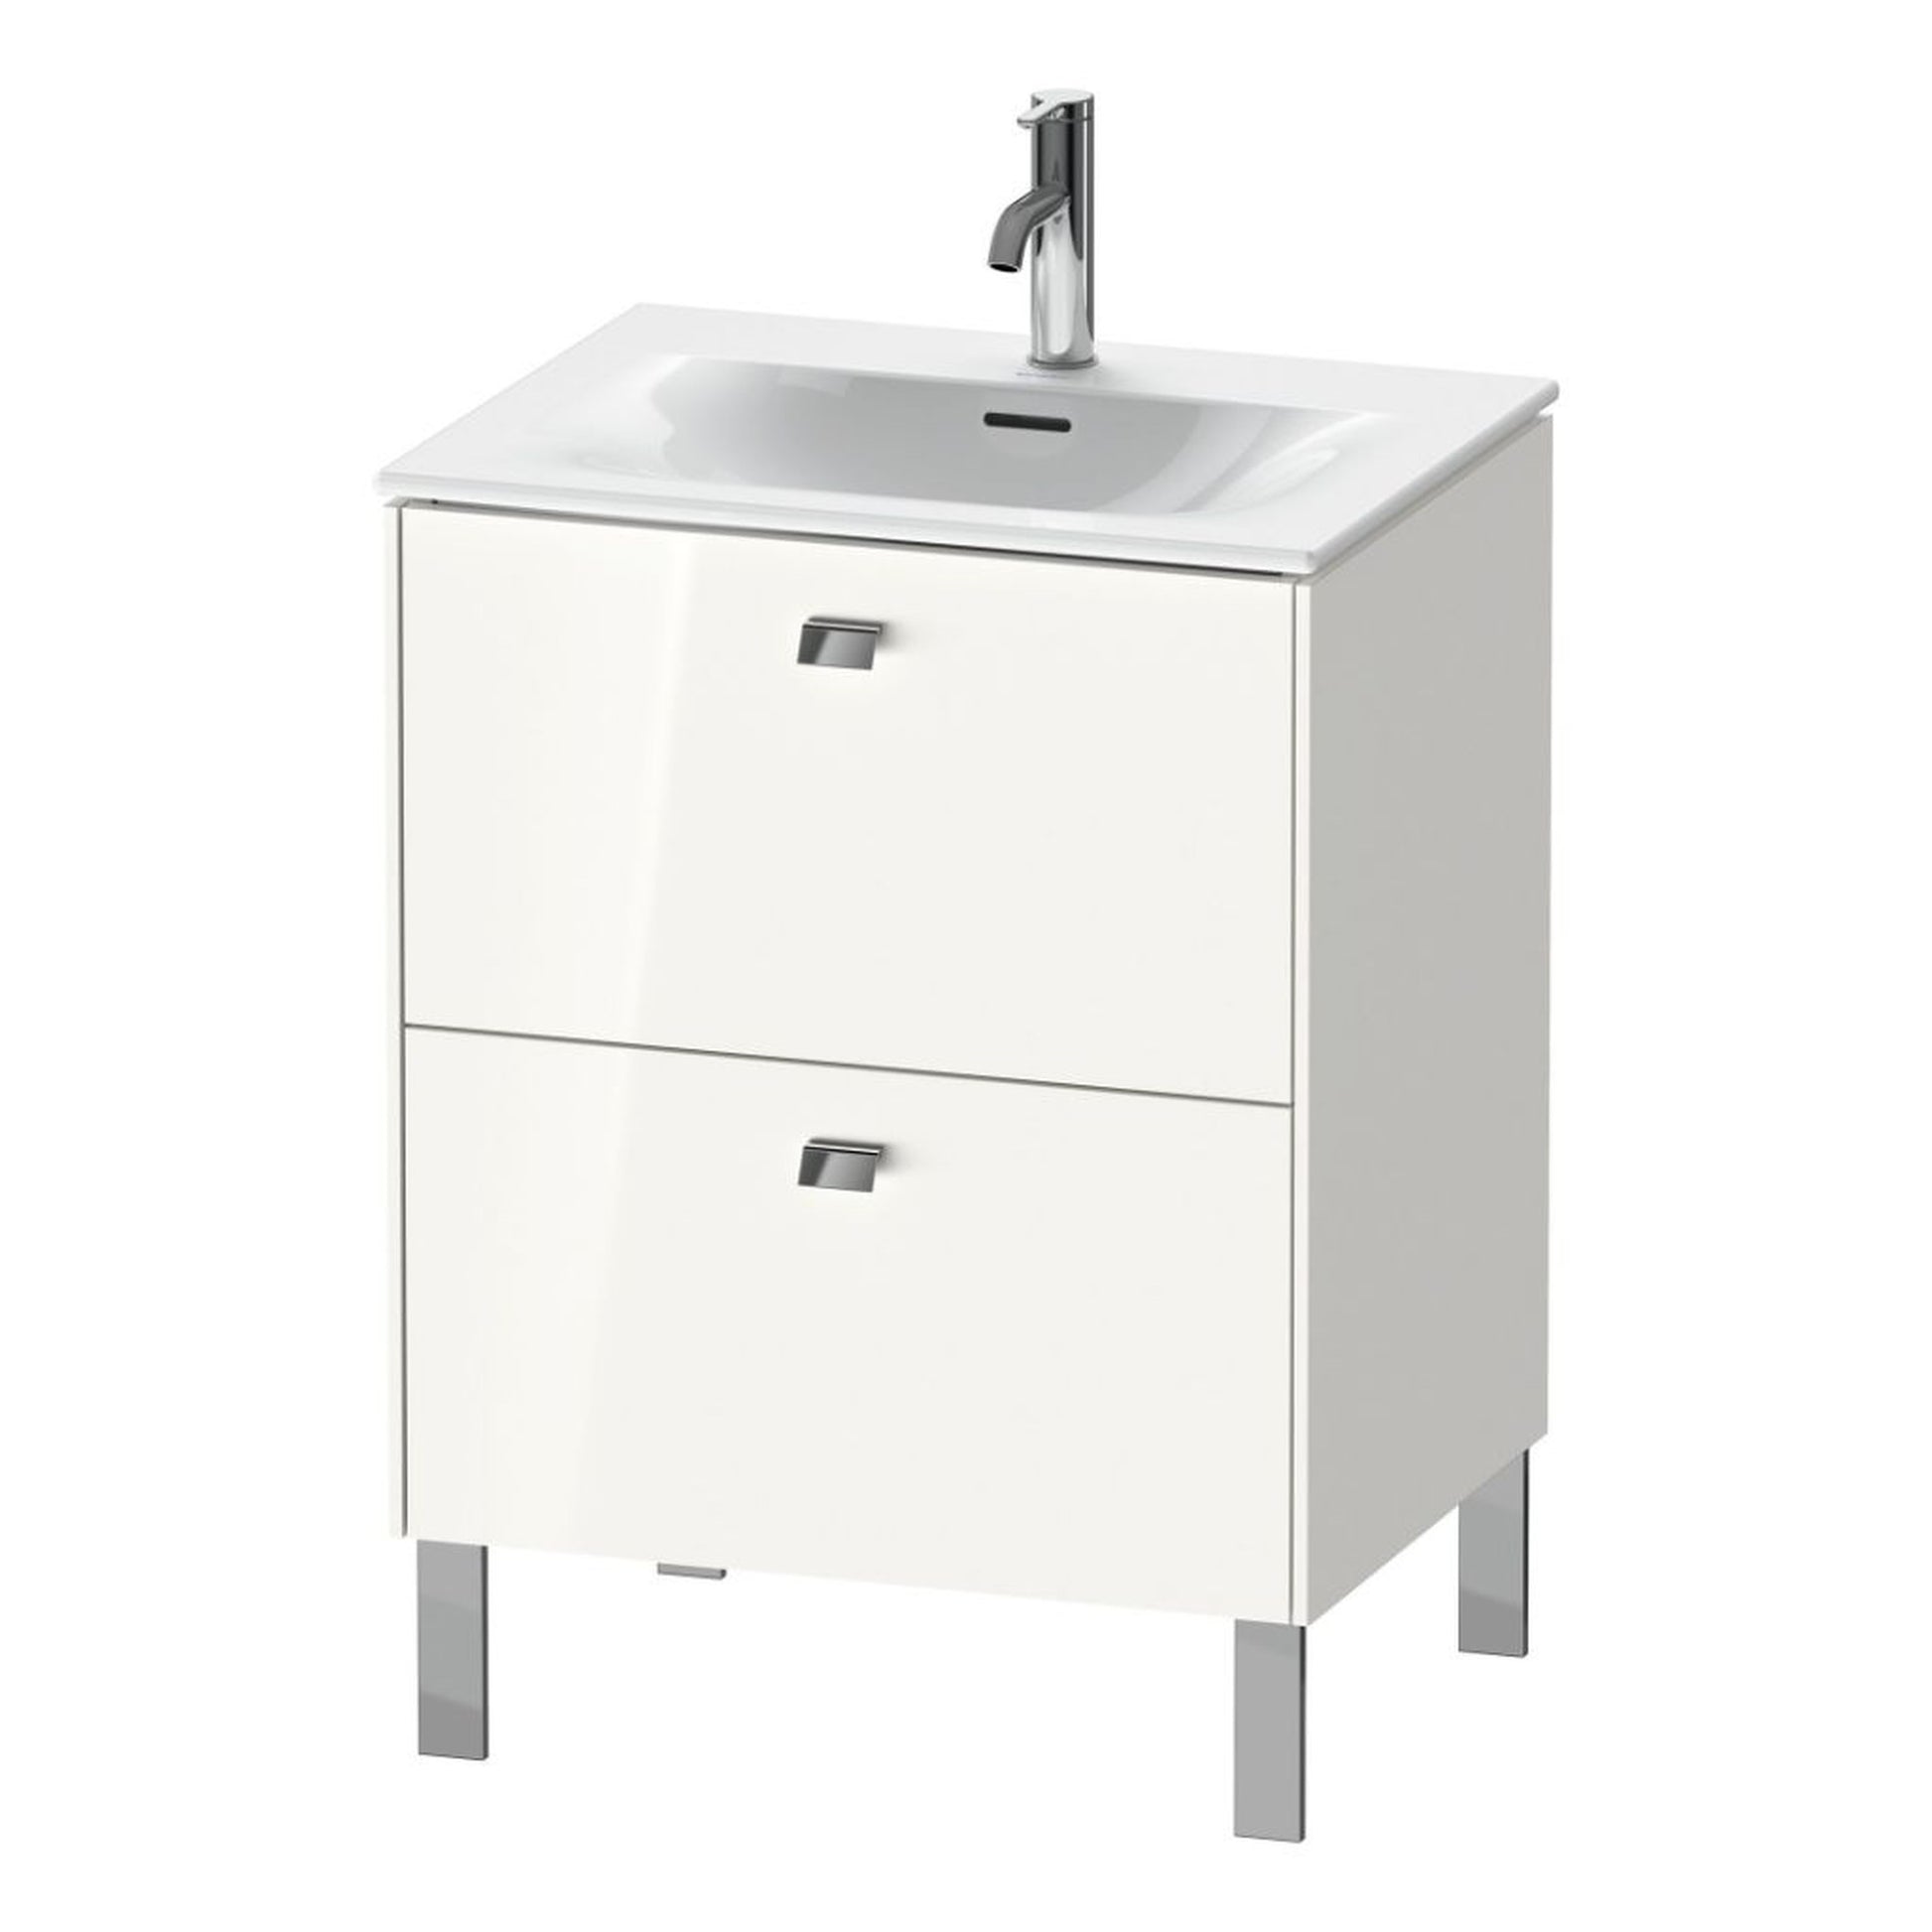 Duravit Brioso BR45100 24" x 27" x 19" Two Drawer Floor Standing Vanity Unit in White High Gloss and Chrome Handle